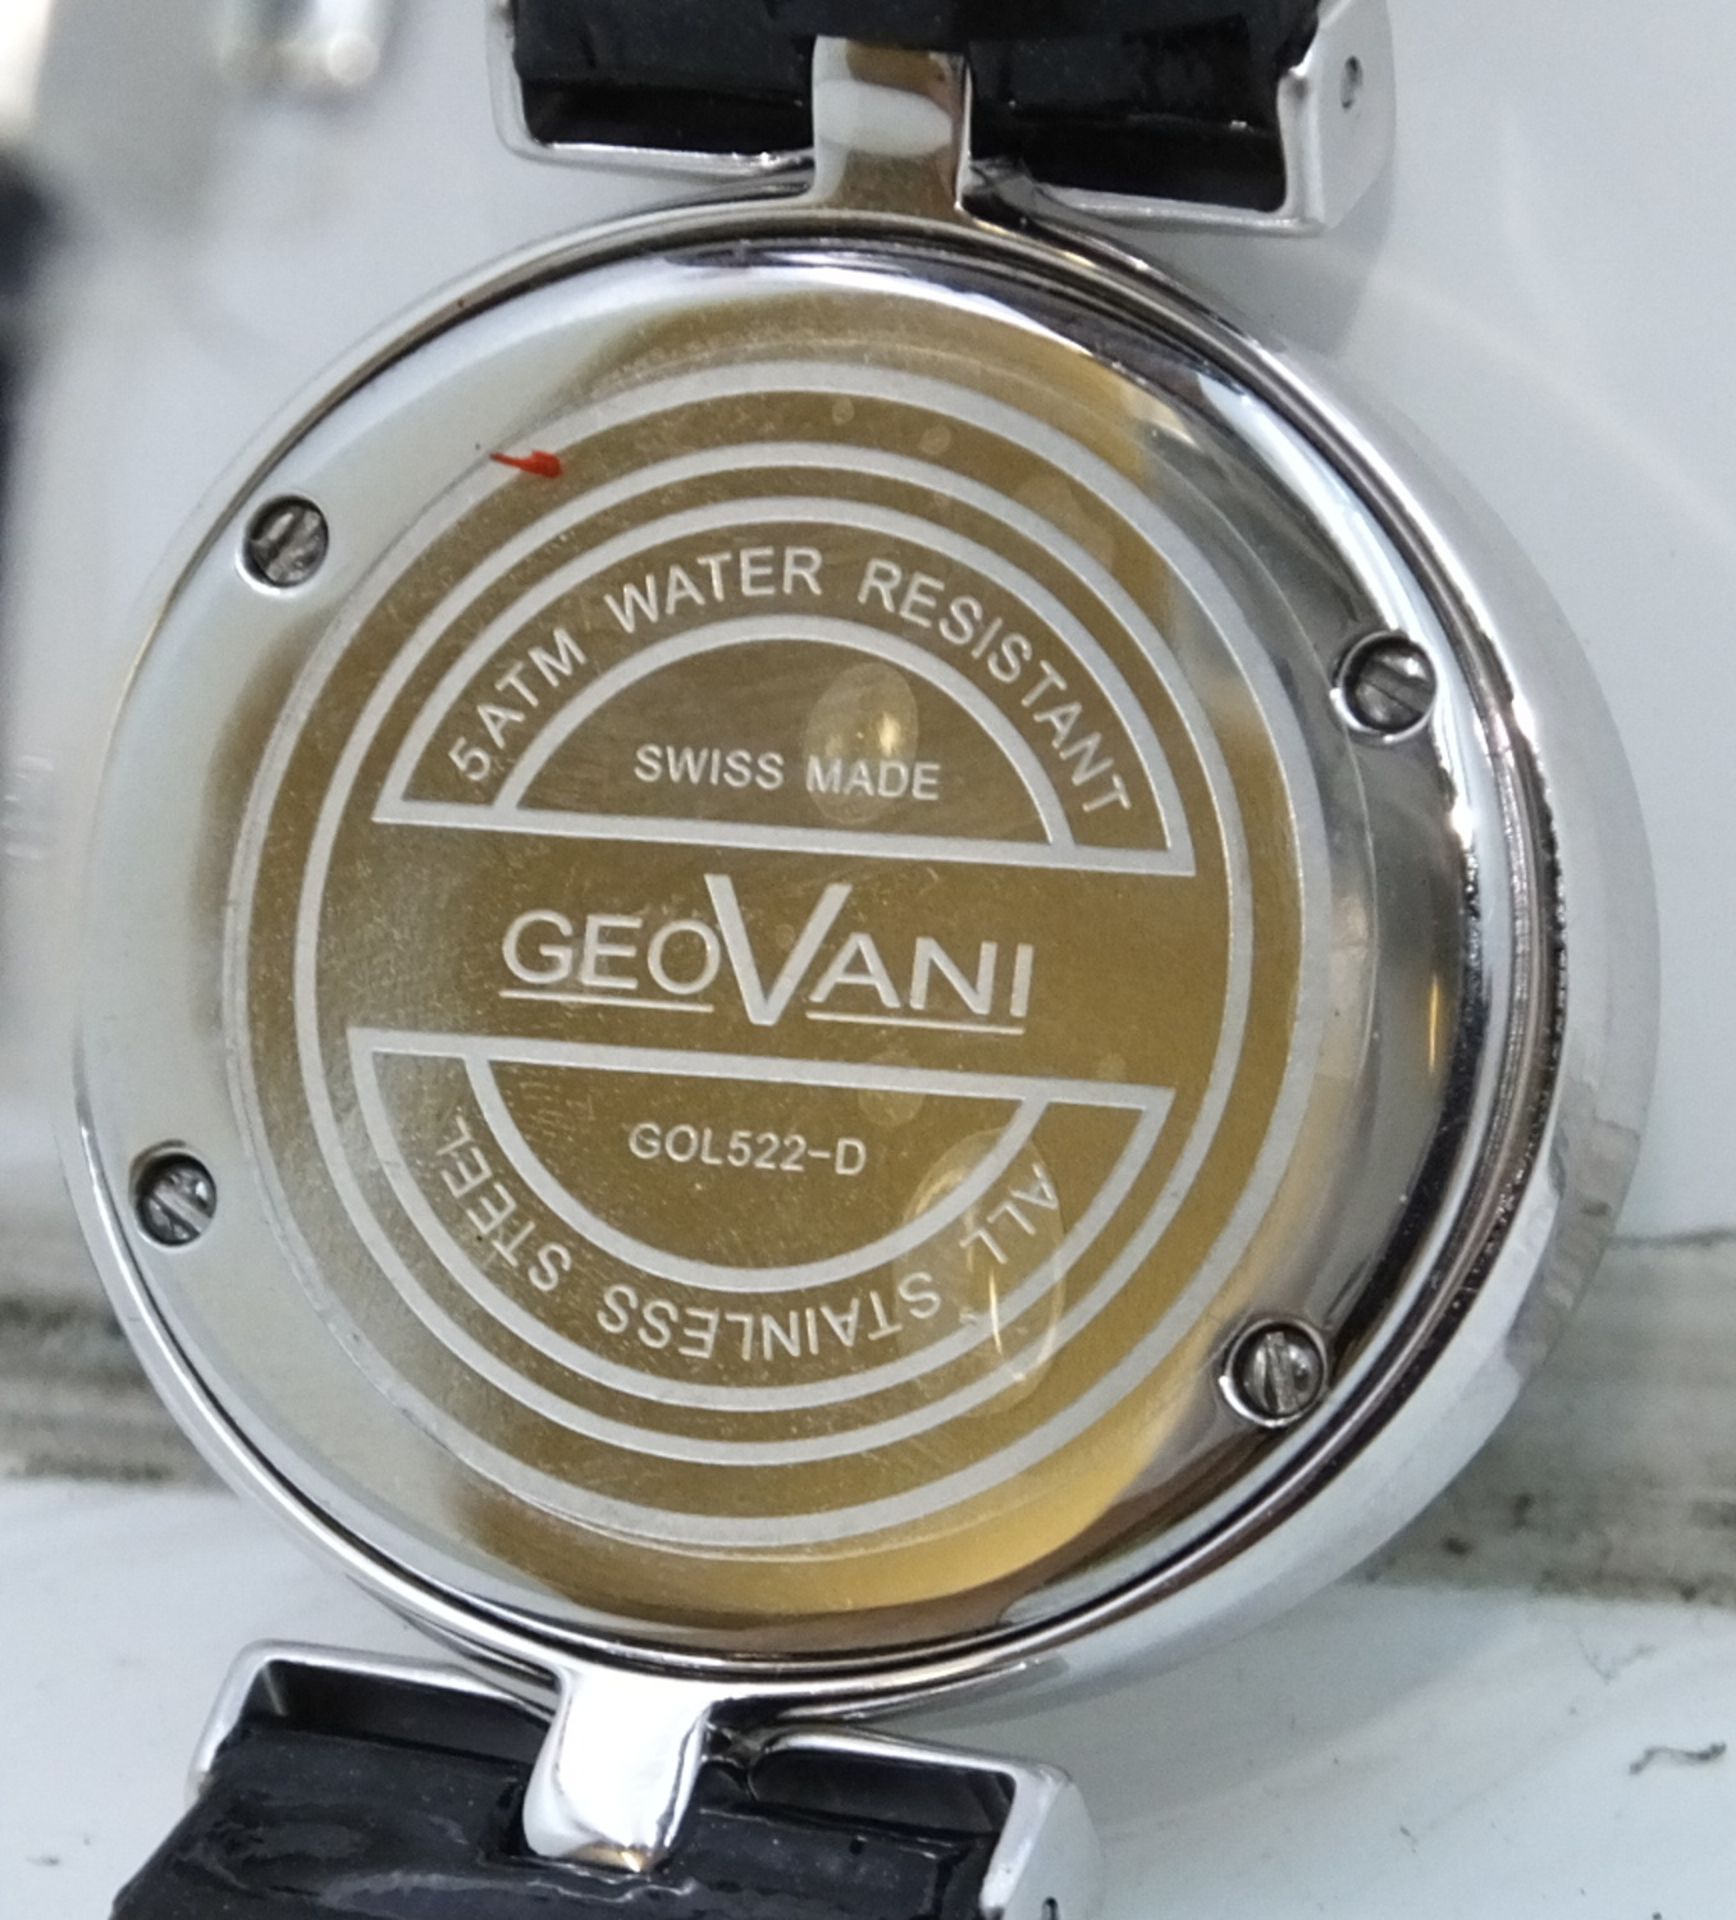 Geovani GOL522-D Stainless Steel Water Resistant (5ATM) Wrist Watch with Leather Strap - Image 3 of 3